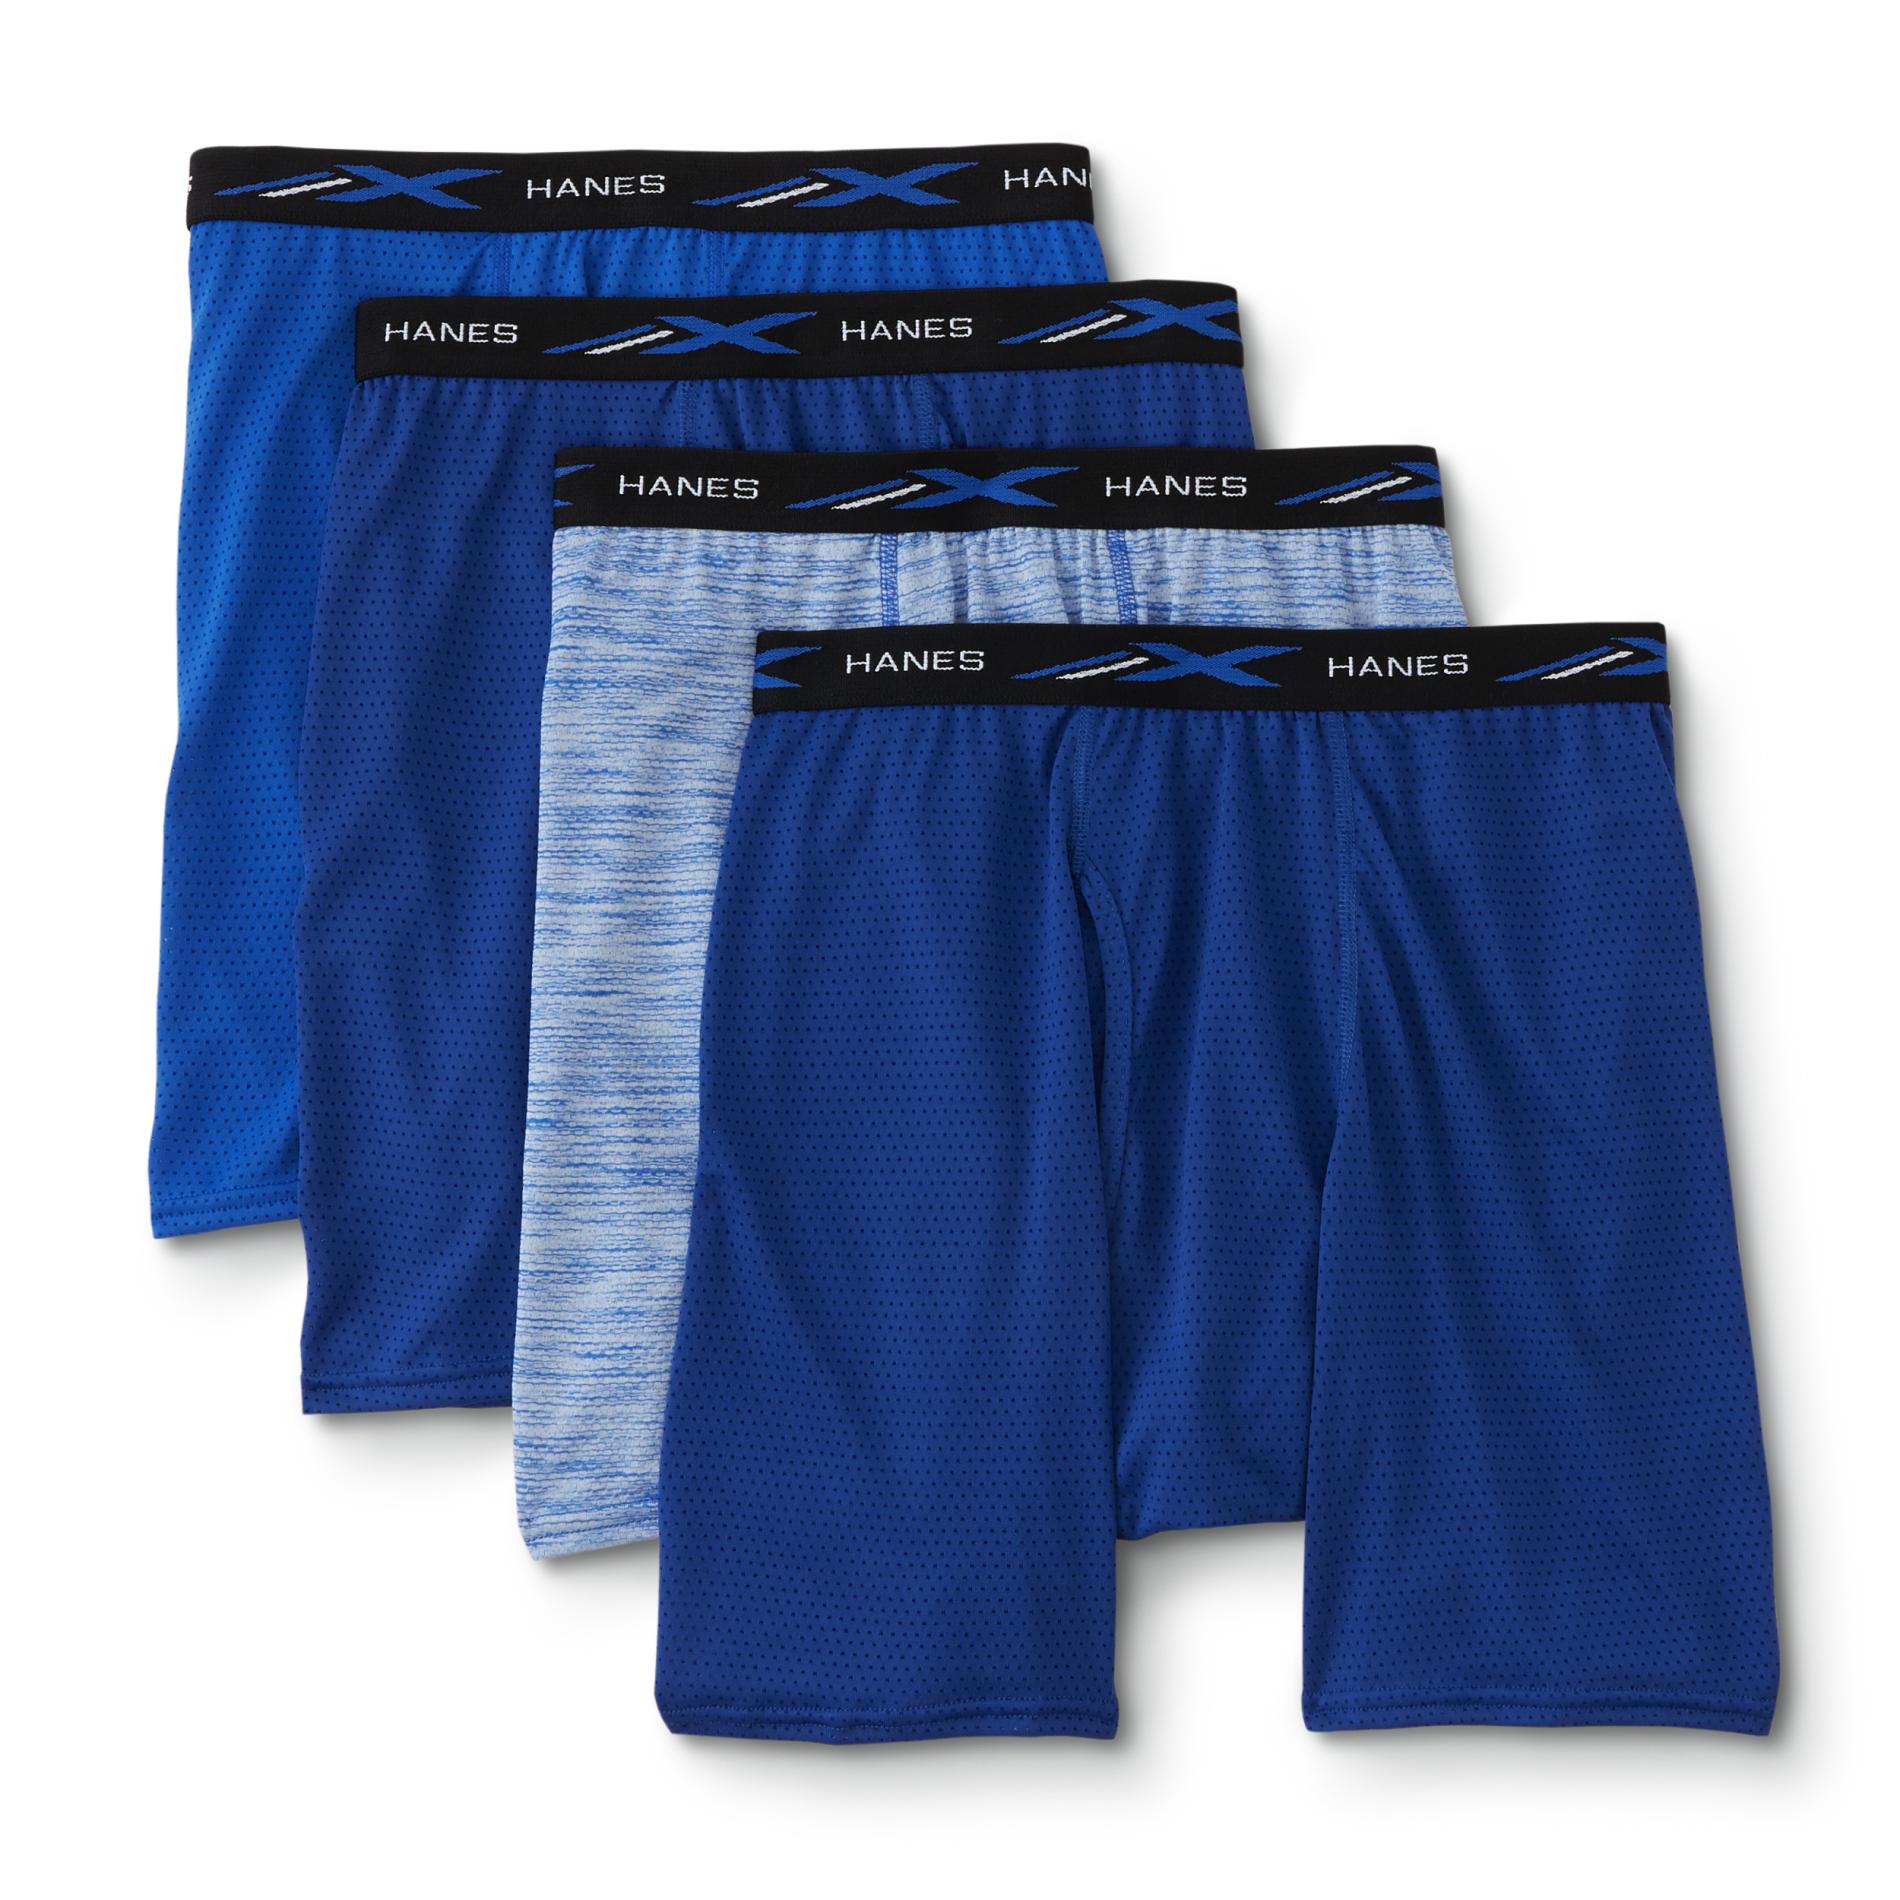 Hanes Men's 4-Pack Mesh Boxer Briefs - Space-Dyed